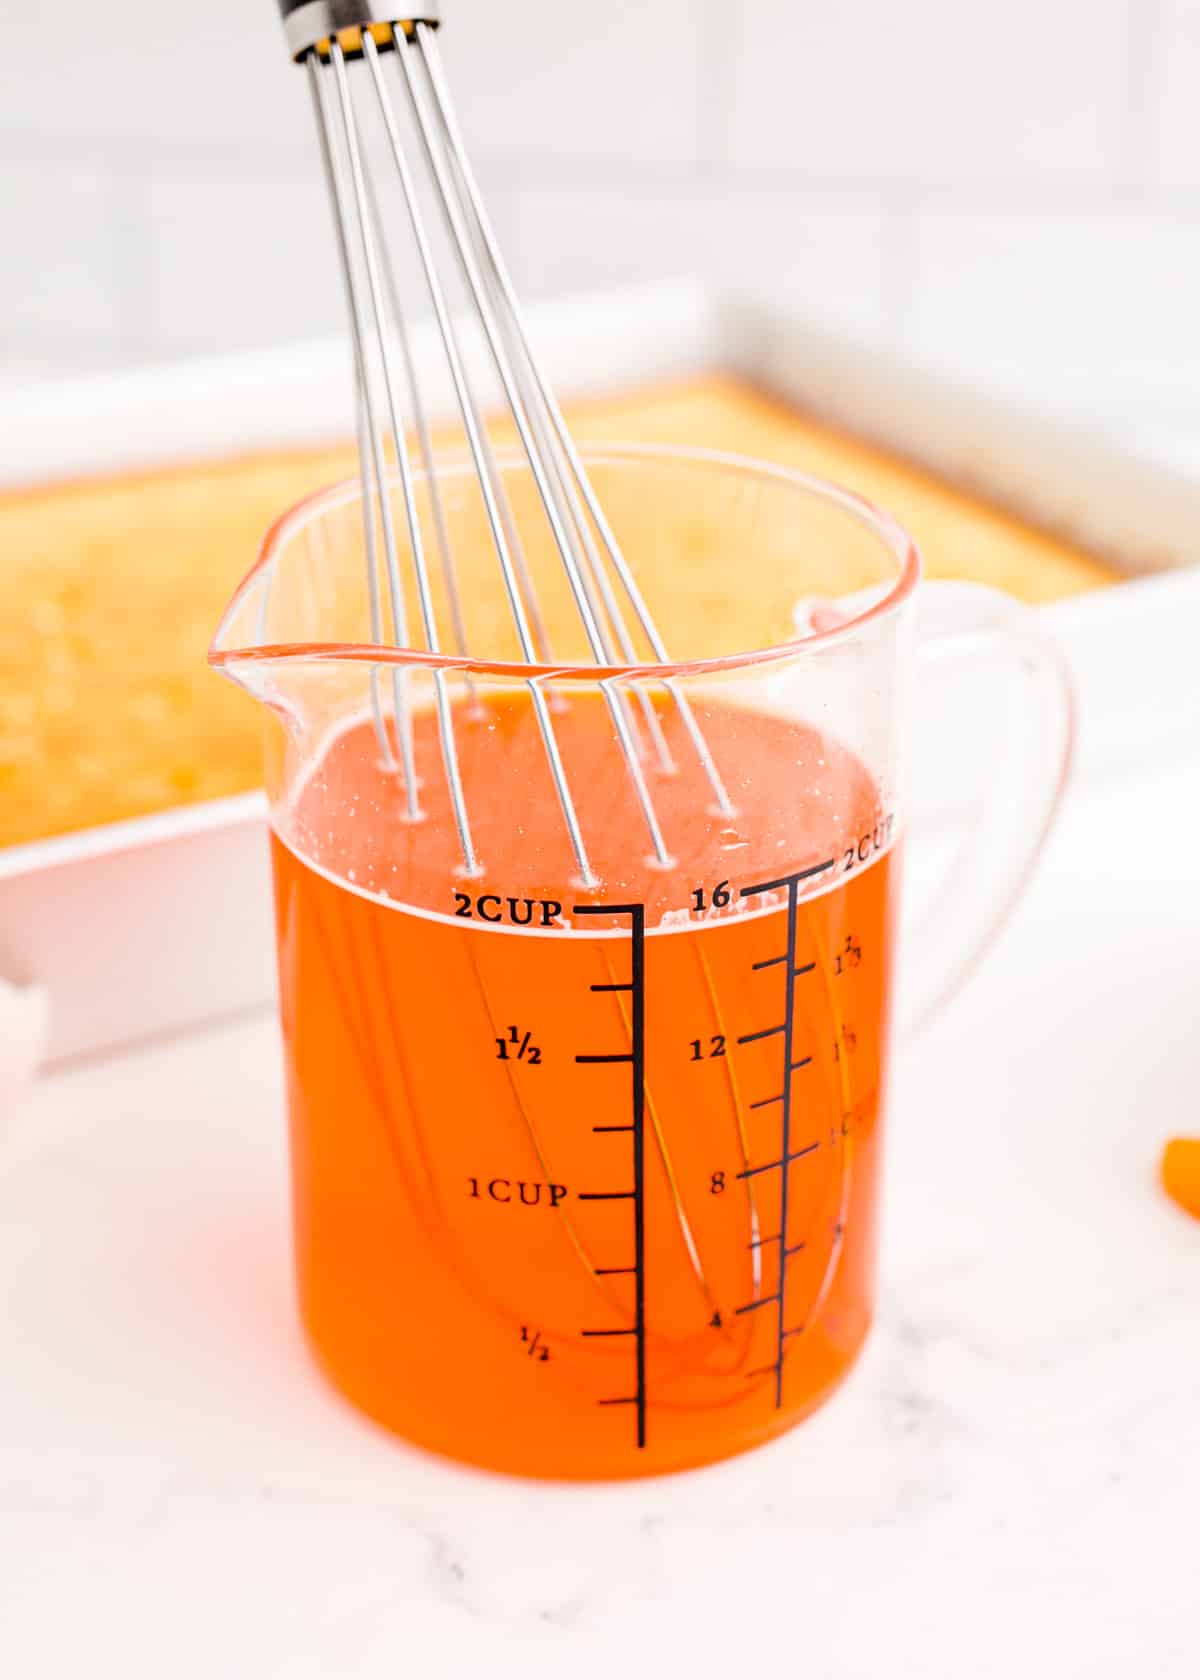 Orange jello being whisked in a measuring cup.